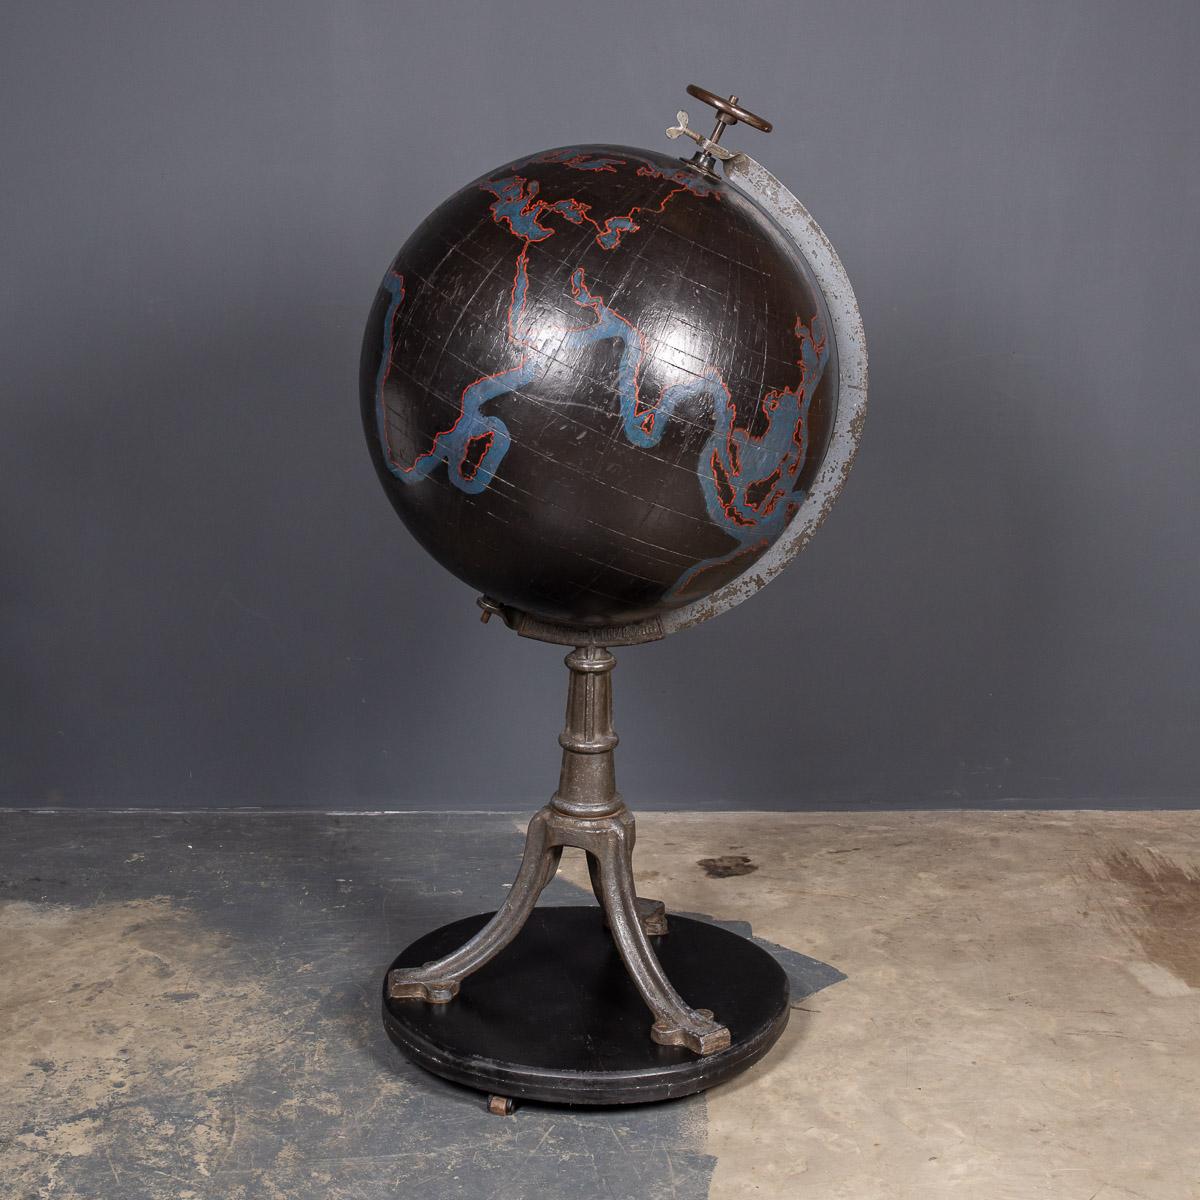 Antique 19th century Victorian large globe, painted black, previously used for educational purposes, with just the outline of continents and countries highlighted in red. Made by The Brussels National Institute of Geography, the globe is constructed